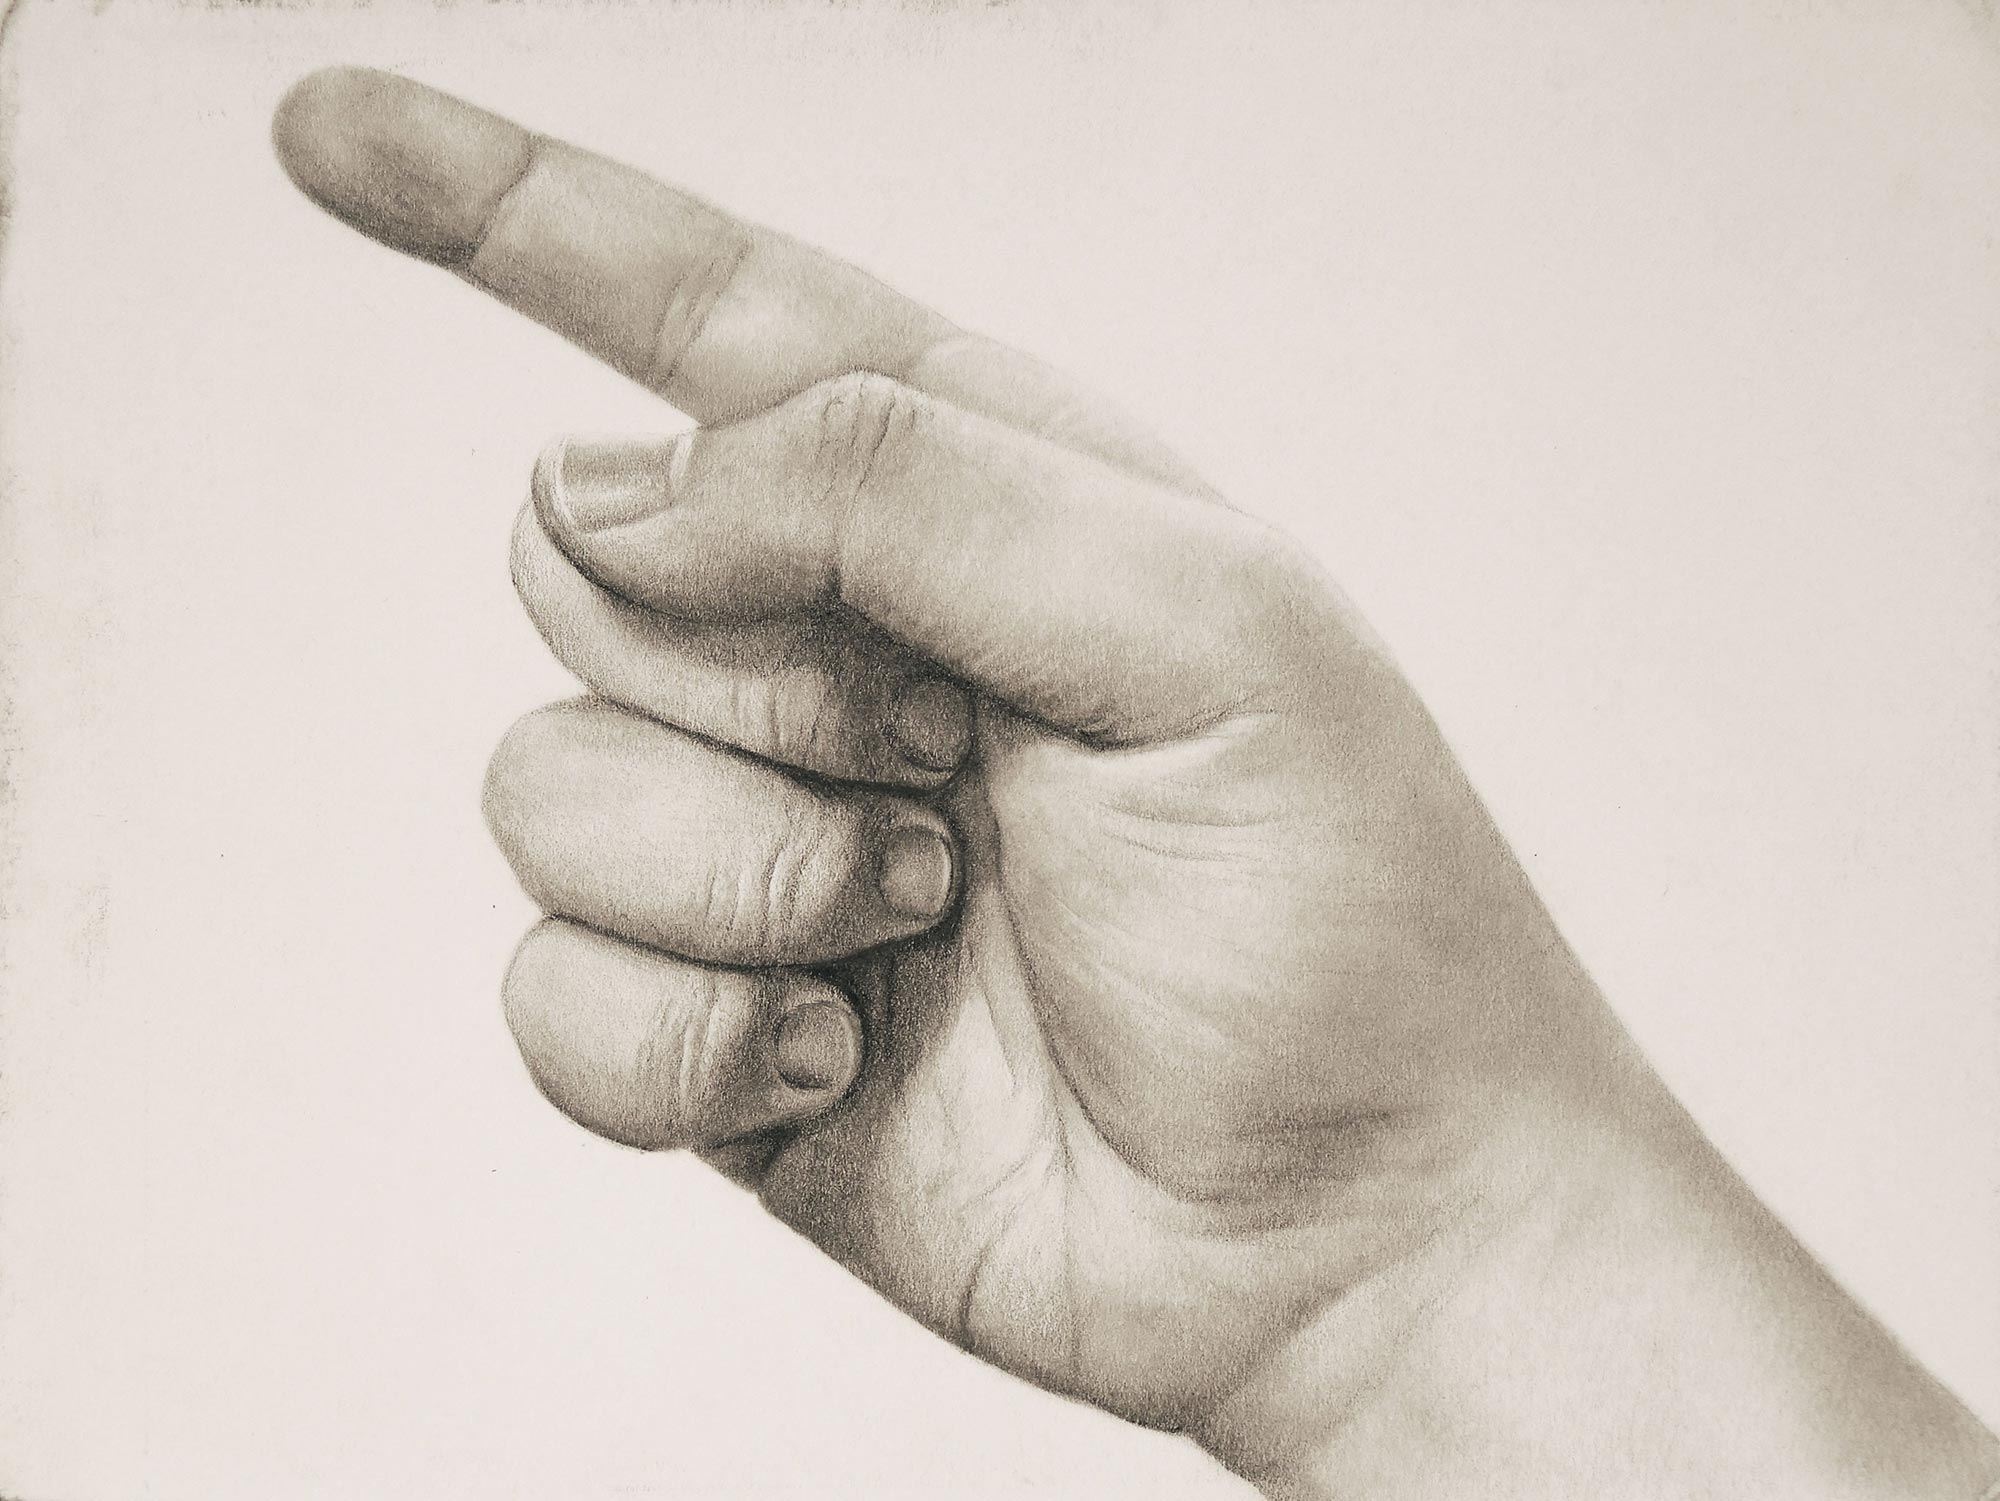 A drawing by Perdong Lin of a pointed finger